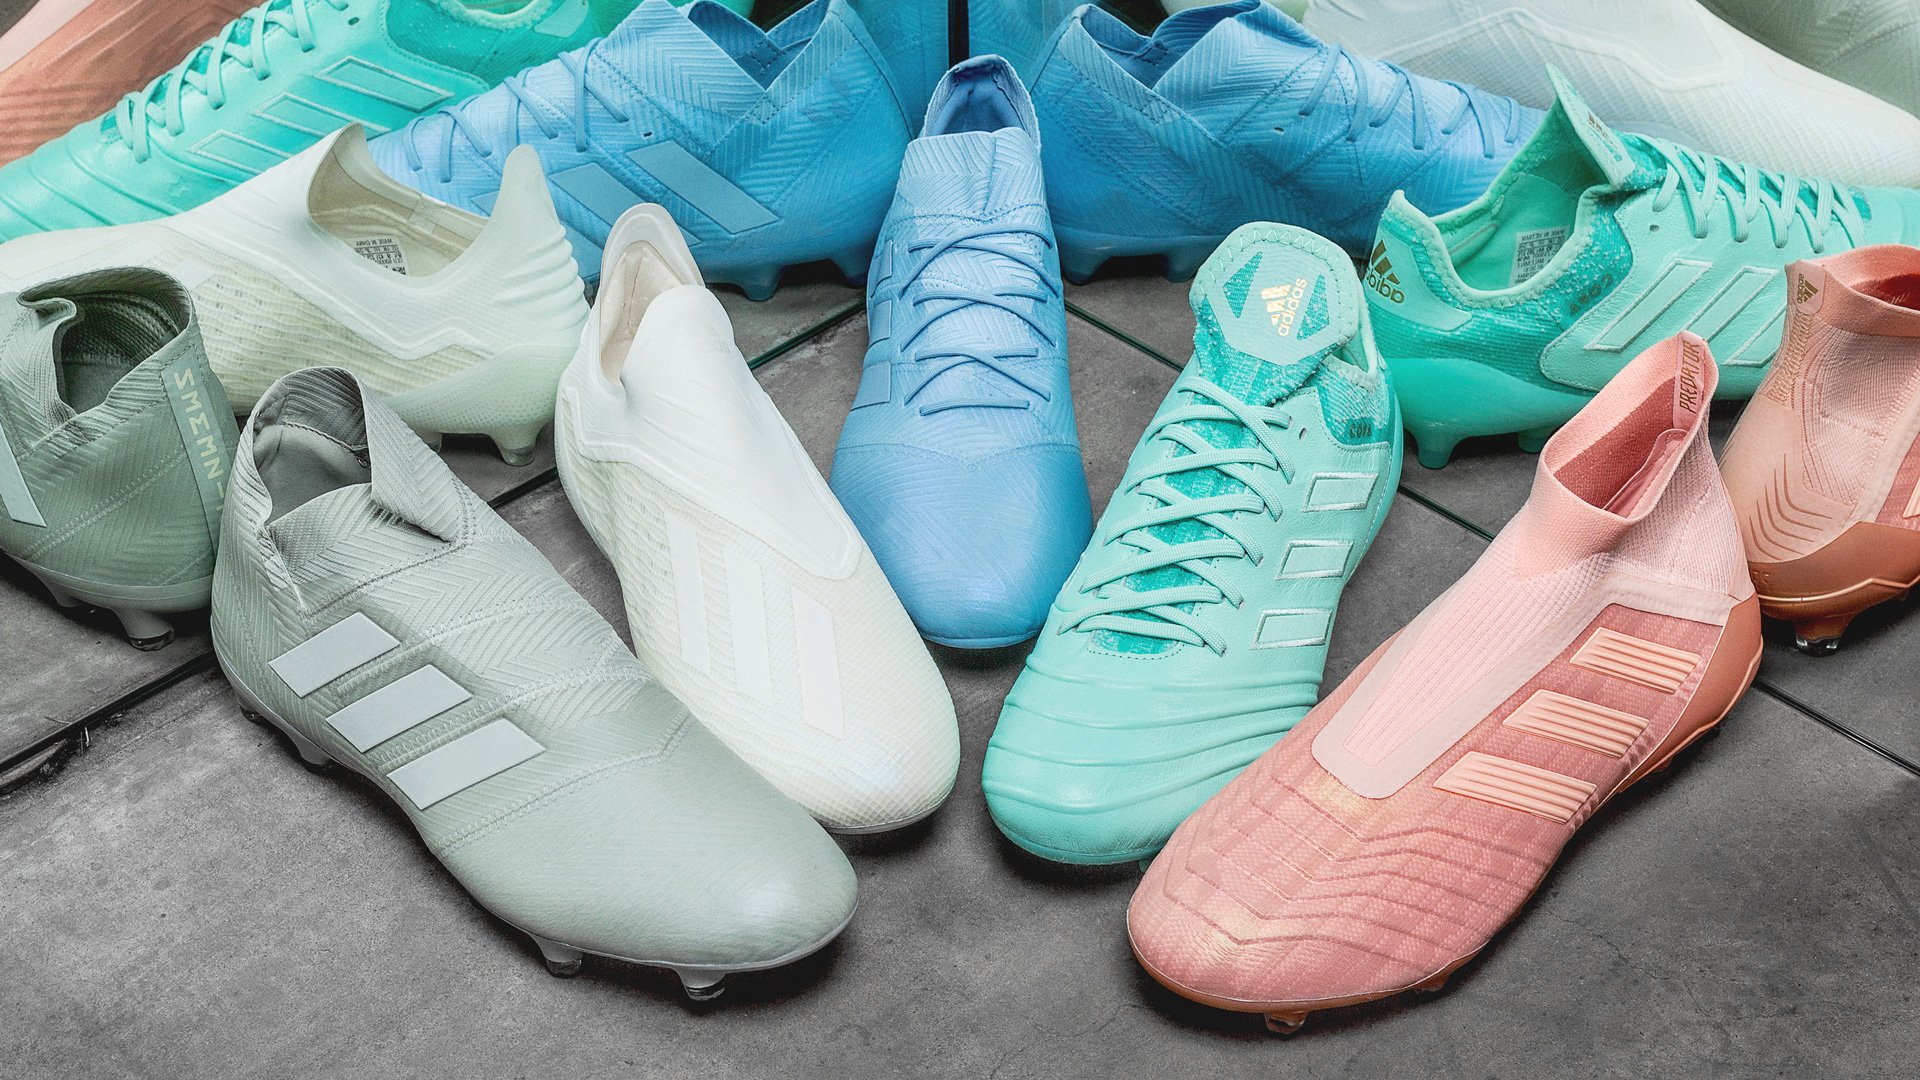 adidas presents Spectral Mode | Read more at Unisport